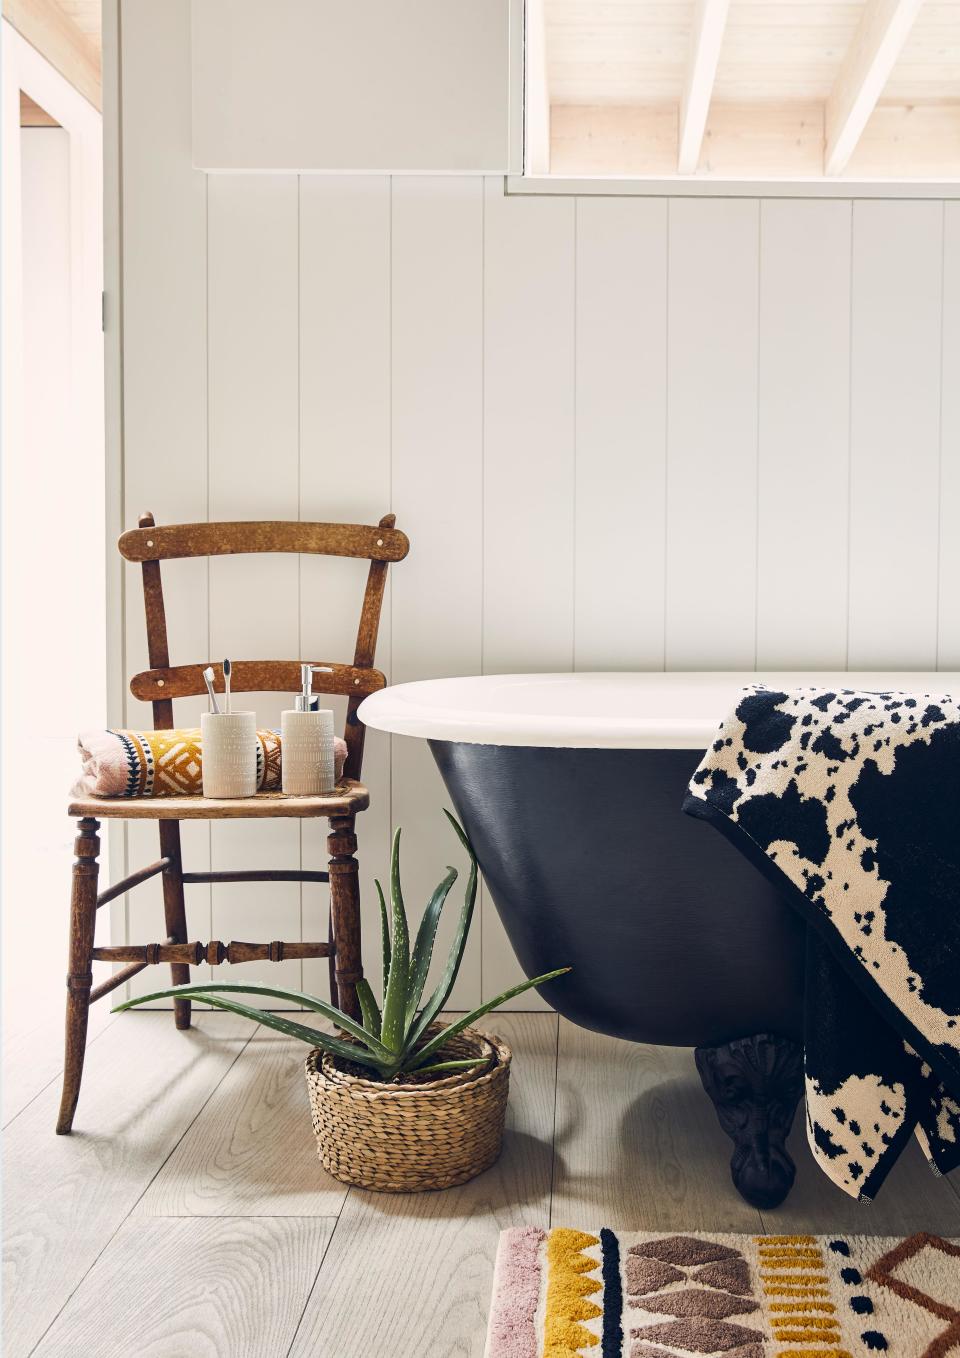 <p> If you have a roll-top bath, or even a bath with a panel, painting it can give it a new lease of life. It&apos;s also a great way to start a new color scheme in your bathroom &#x2013; we love the dark bath against the fresh white walls and the pattern of the bath mat and towel (which is Asda, would you believe?).&#xA0; </p>